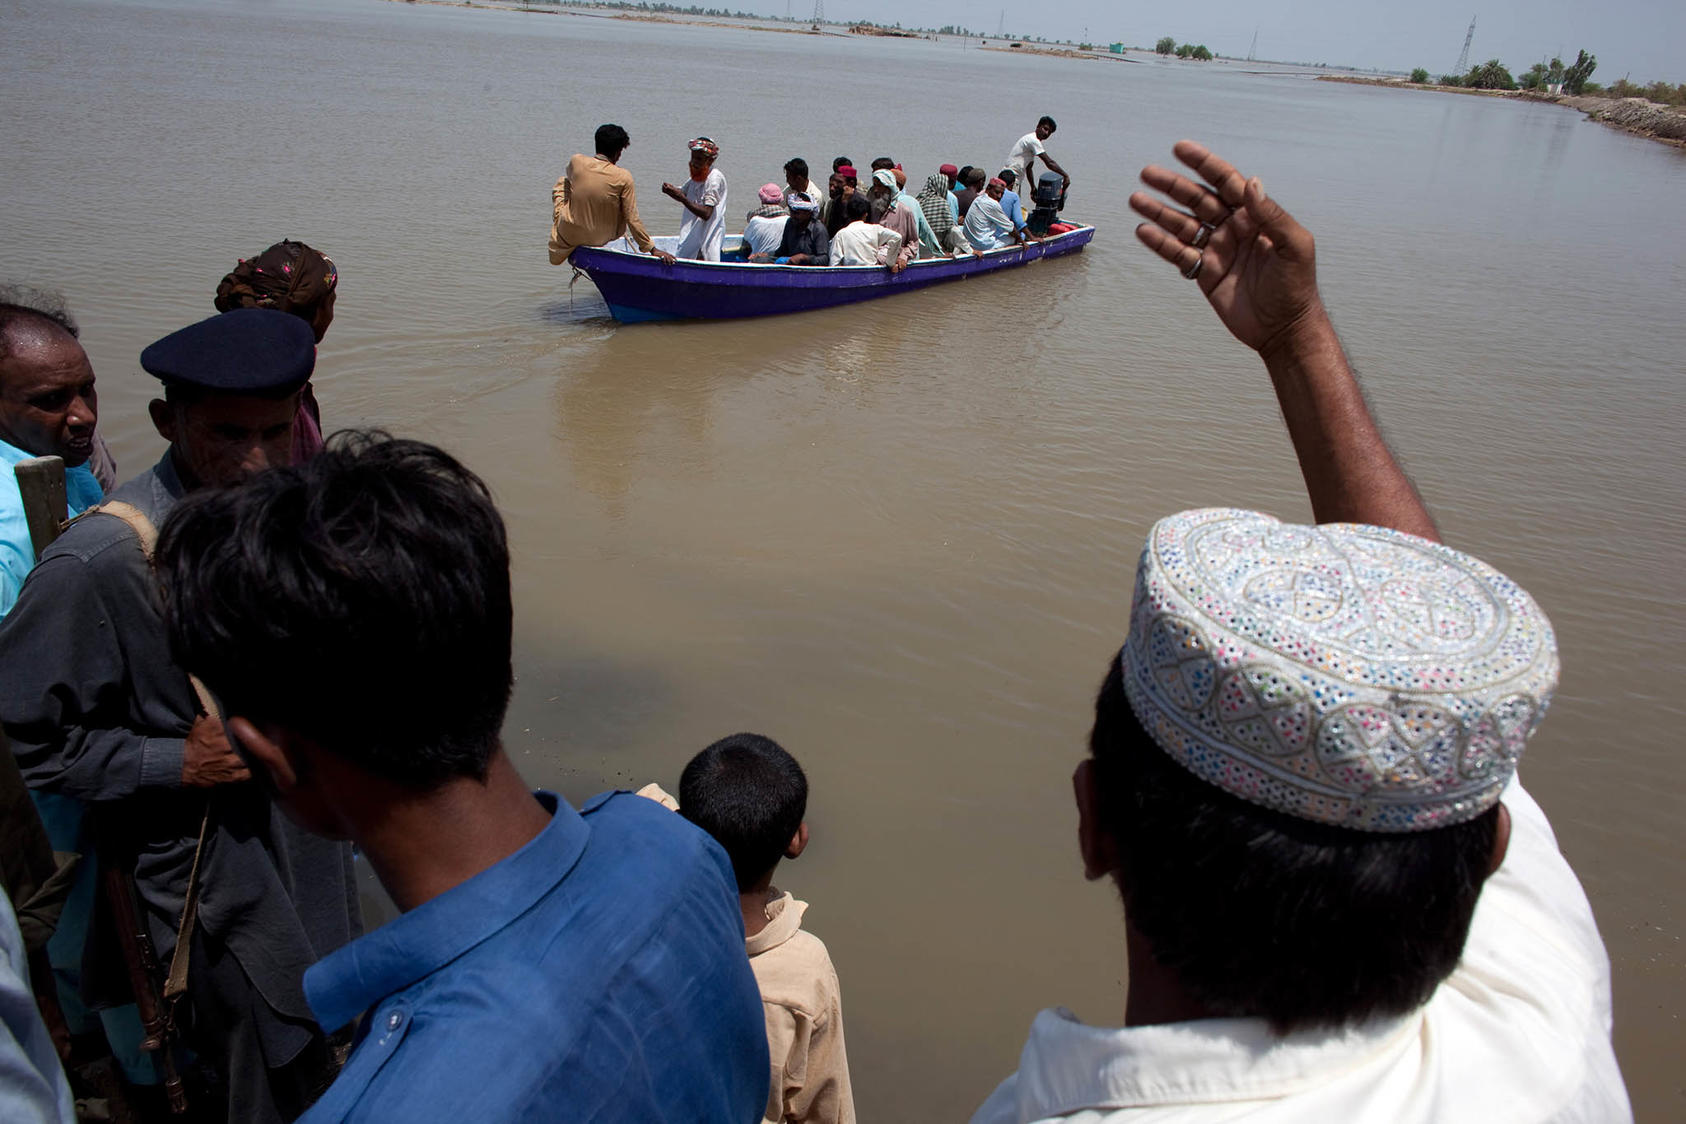 Displaced survivors of the floods in Pakistan near the village of Shahdadkot on Aug. 23, 2010. Over the last 20 years, over 10,000 Pakistanis have lost their lives due to climate-related disasters. (Tyler Hicks/The New York Times)